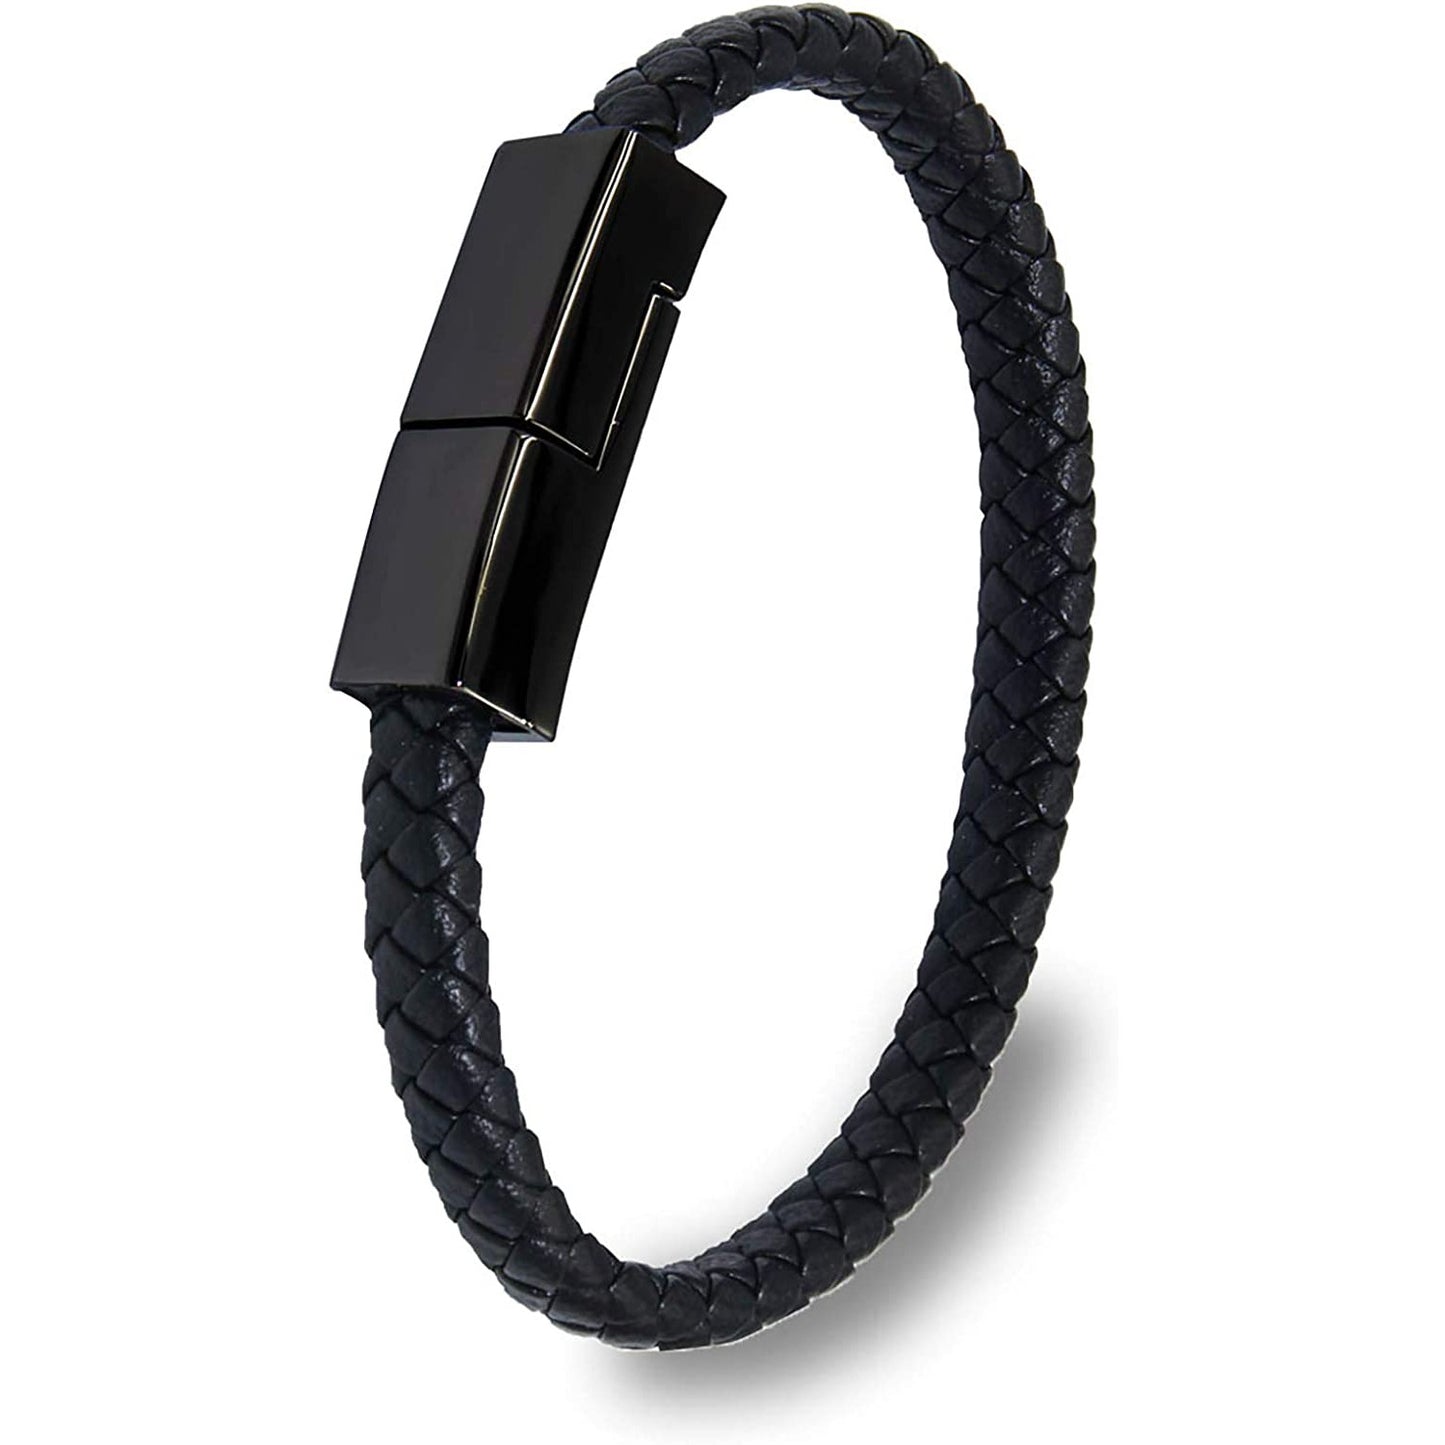 An ordinary looking black weaved bracelet which doubles as a USB charger for a cell phone.